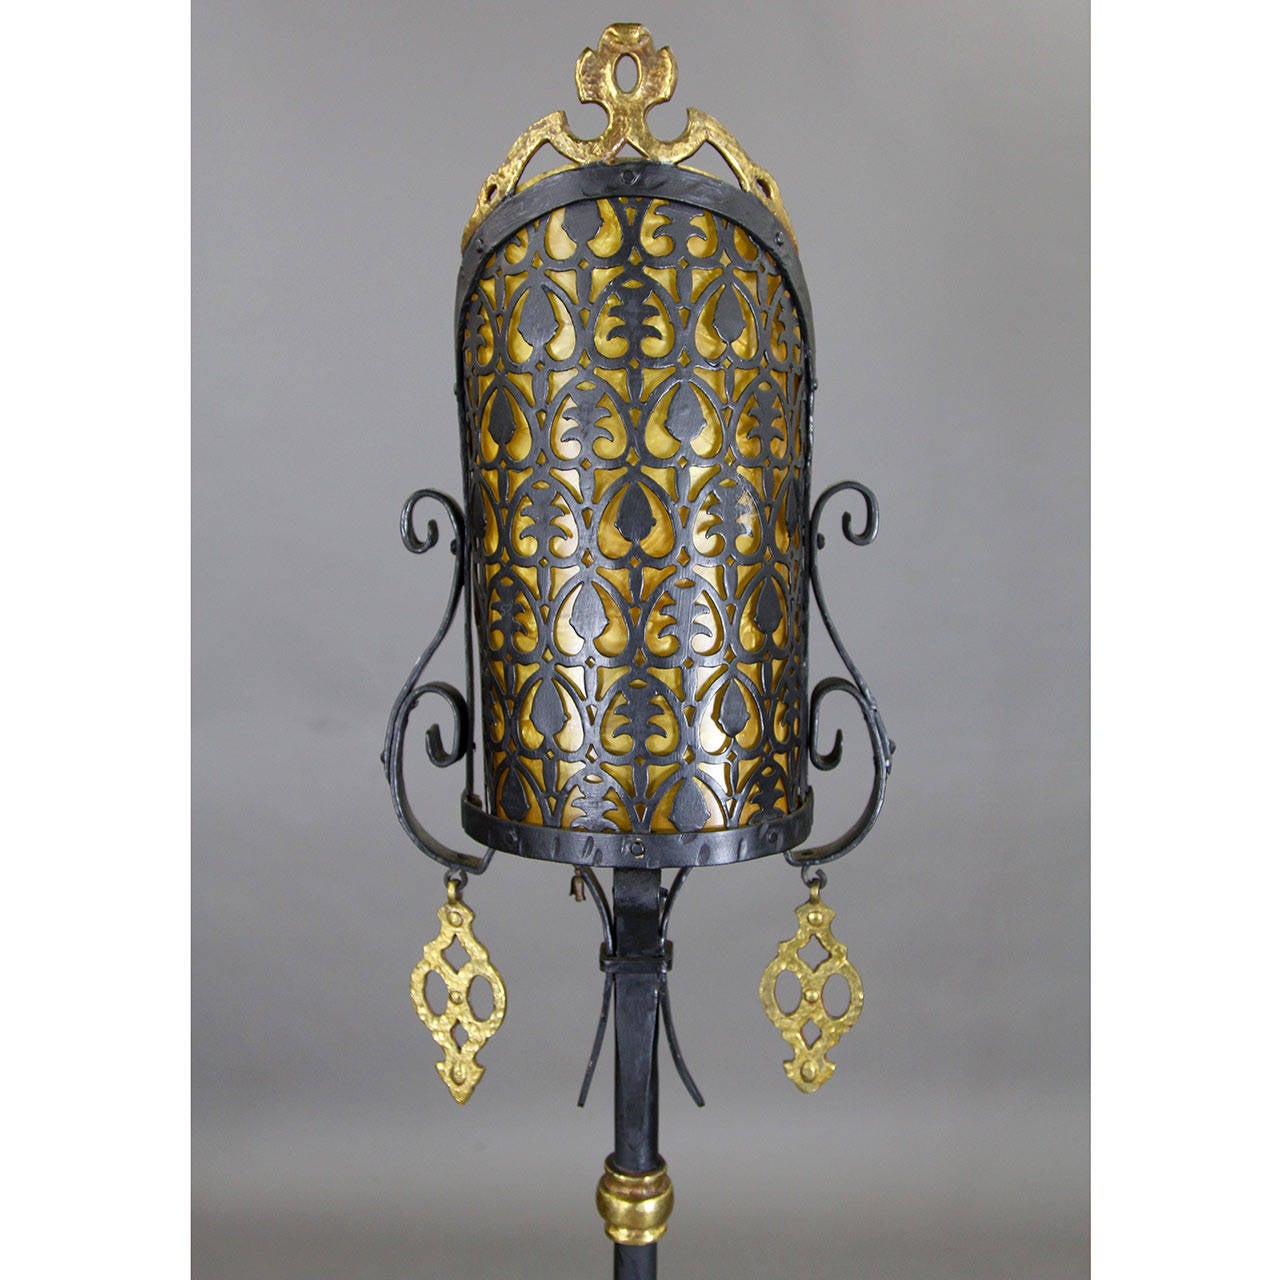 Bronze Pair of Wrought Iron Floor Lamps with Celluloid Shade Liners